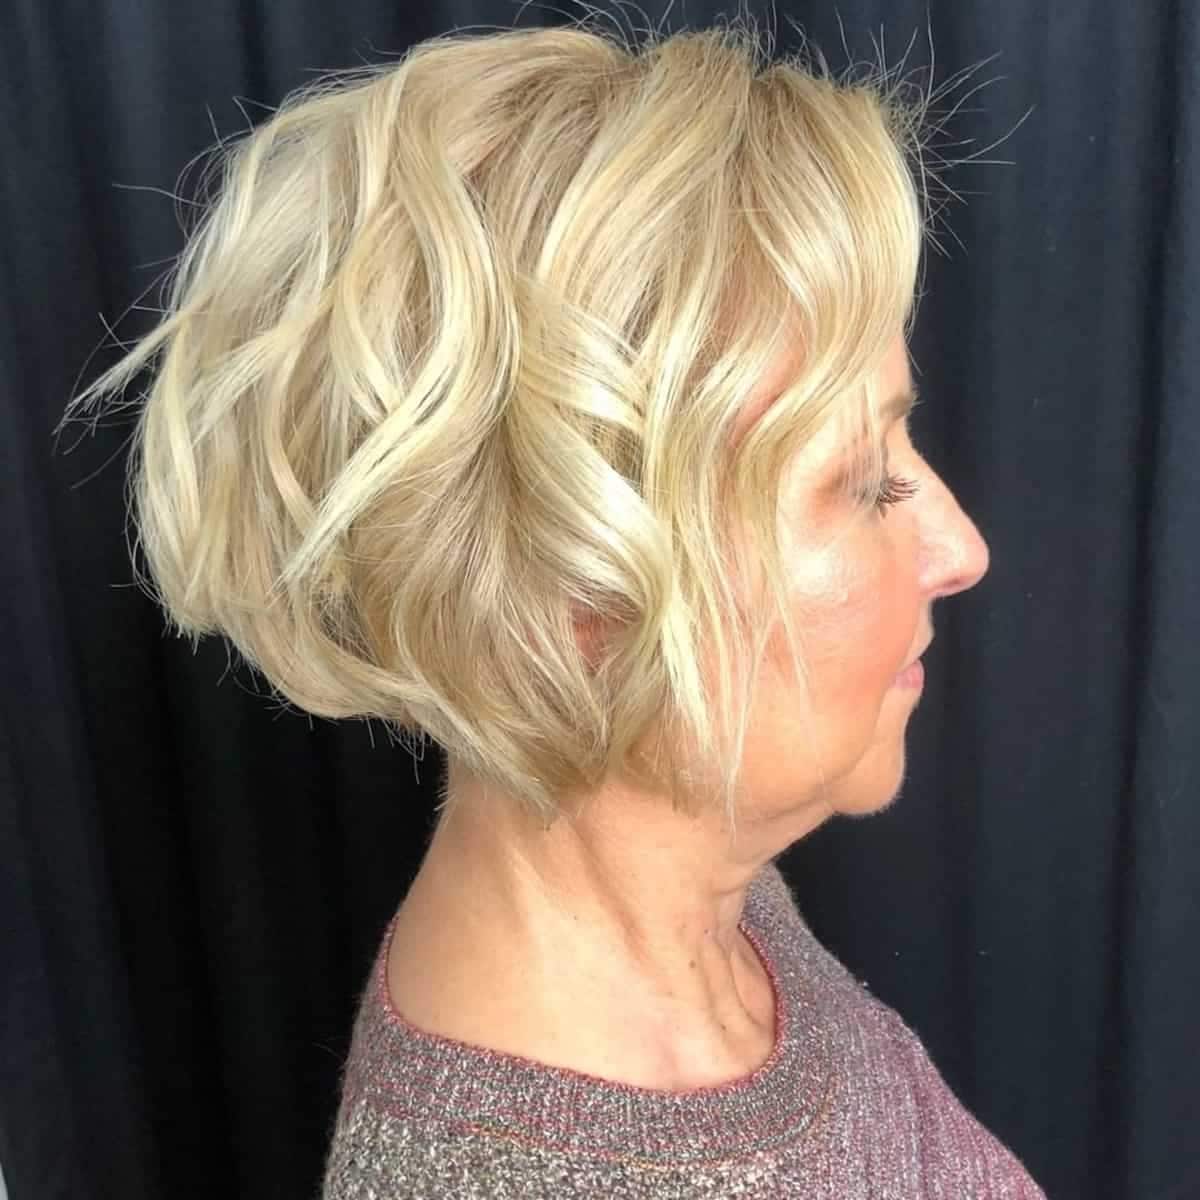 50 Photos of The Best Youthful Hairstyles for Women Over 50